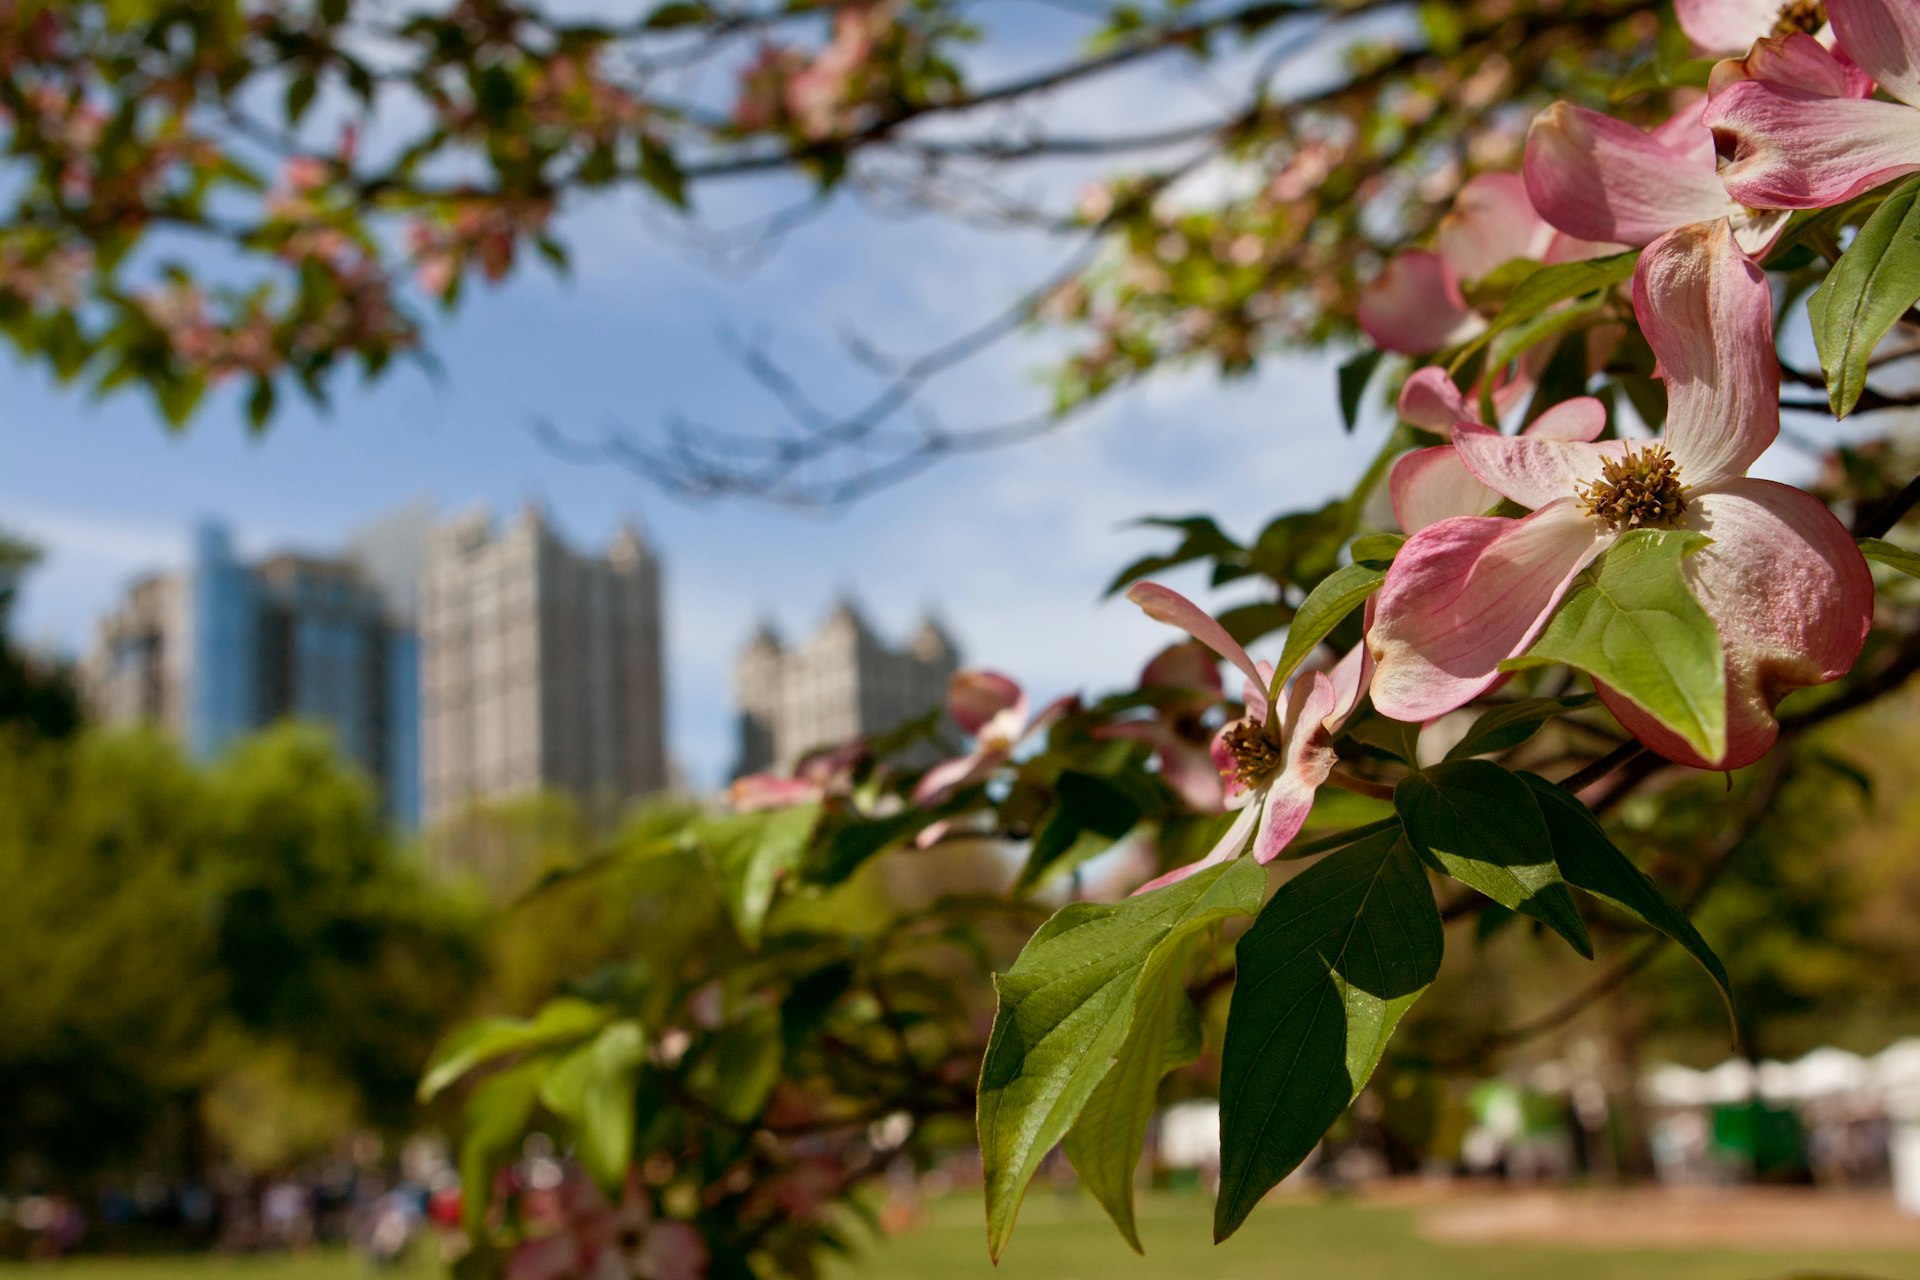 Closeup of the pink blossoms of a dogwood tree in a park